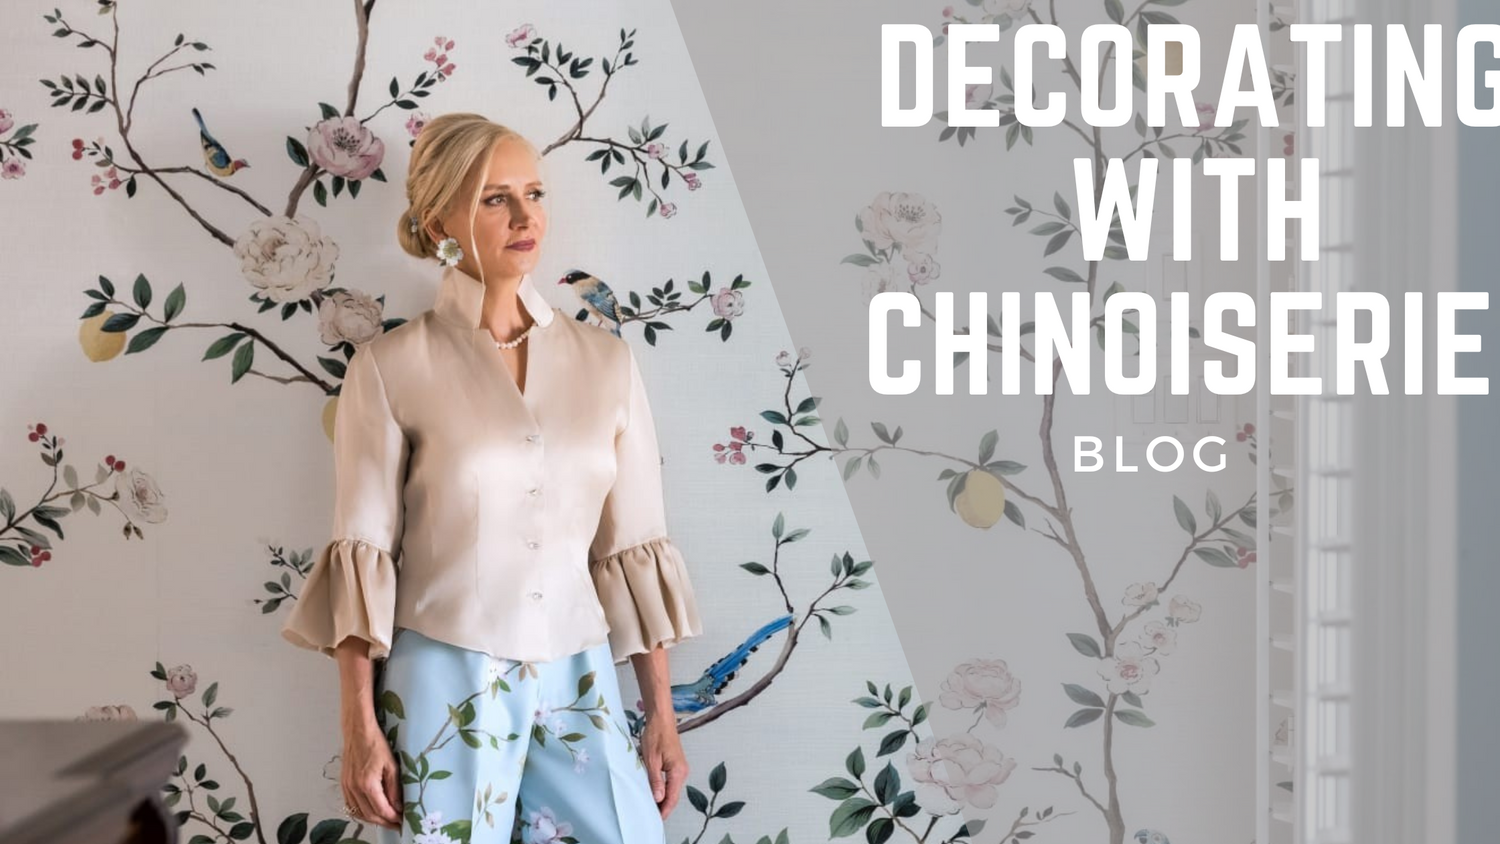 Decorating with Chinoiserie